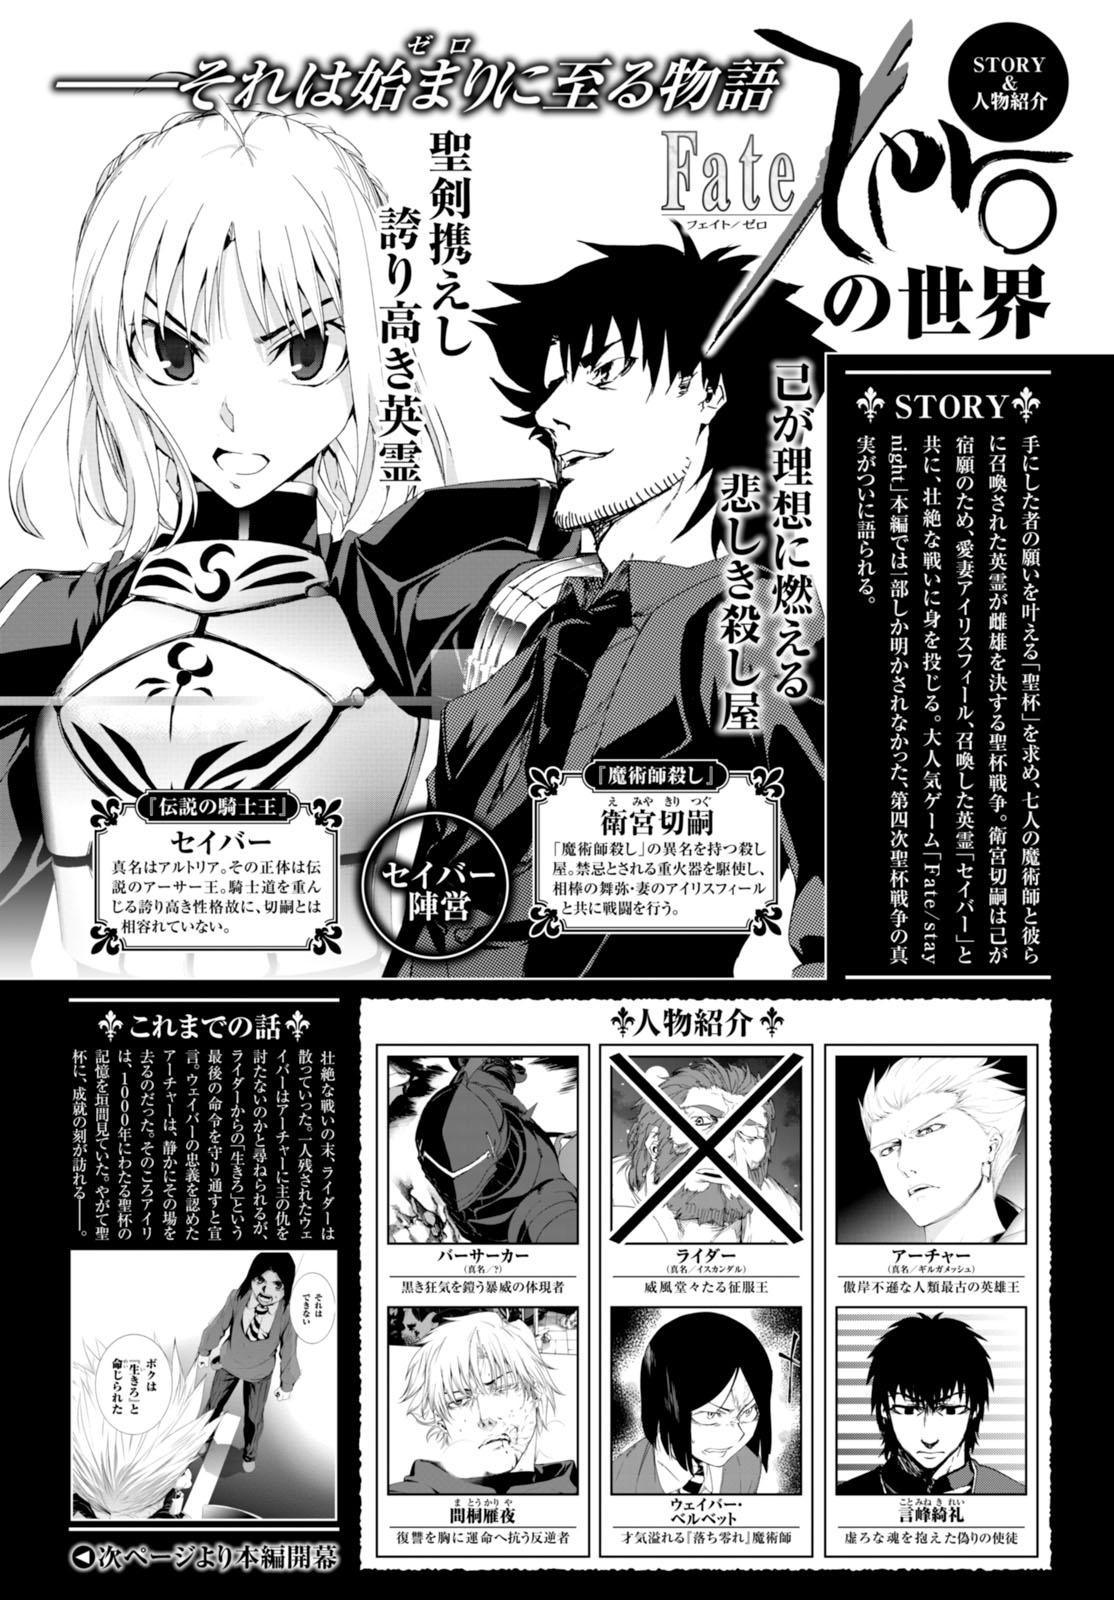 Fate Zero - Chapter 63 - Page 1